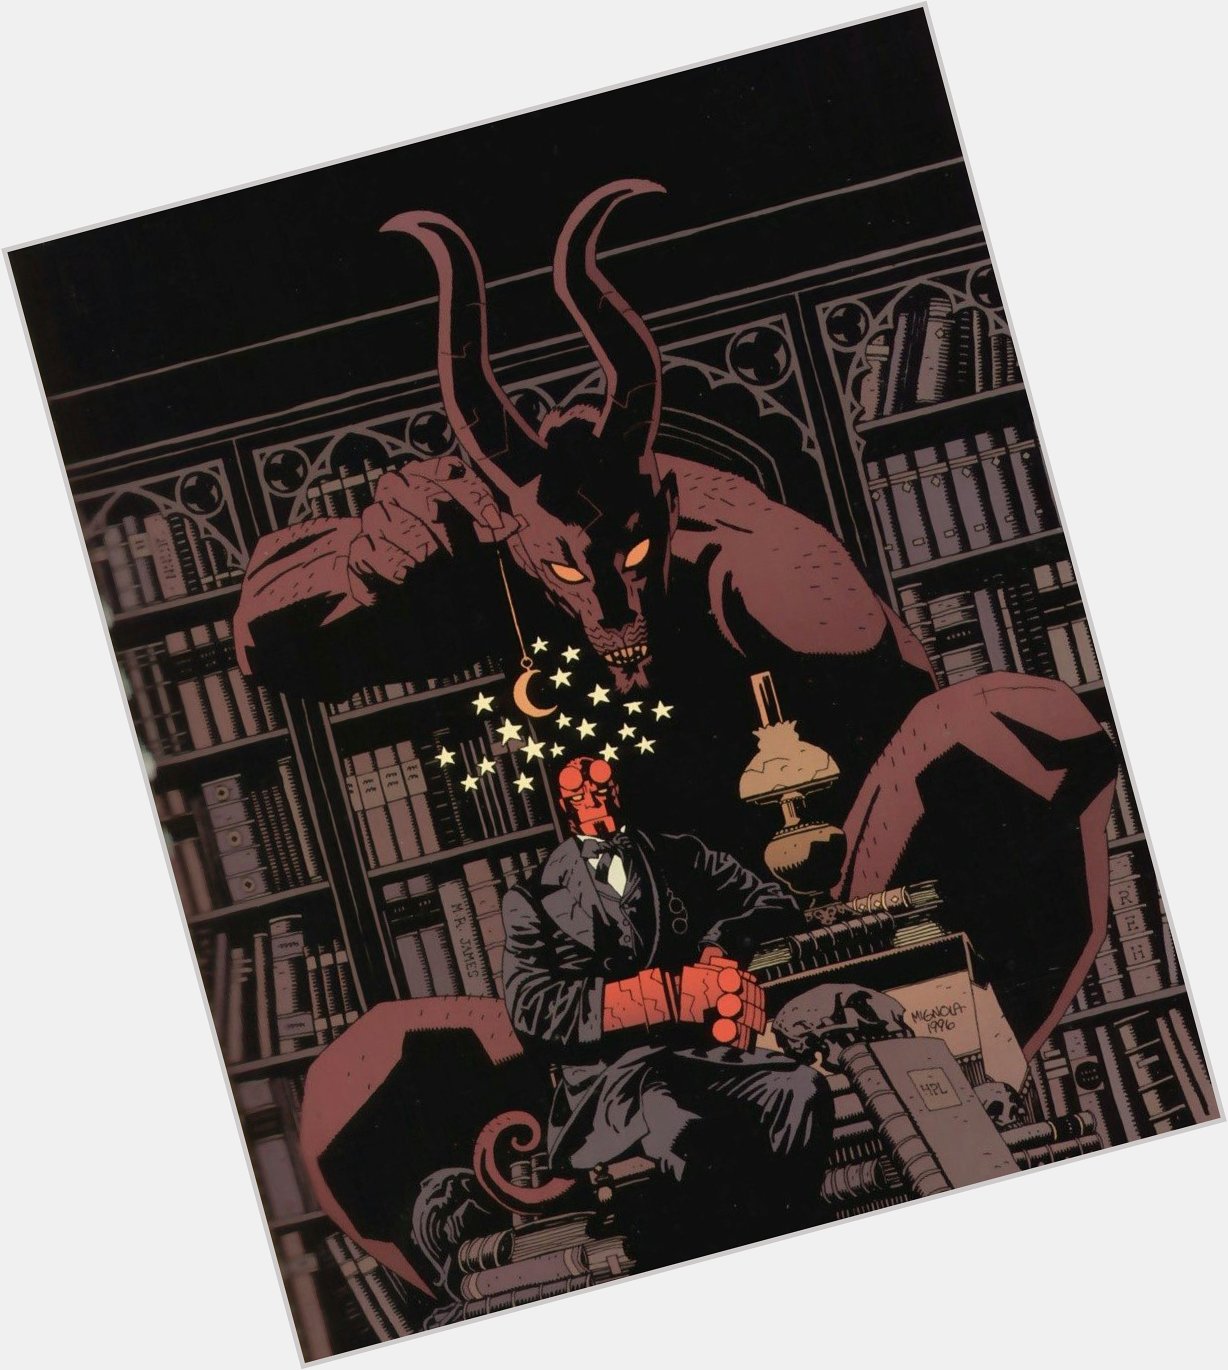 Happy birthday, Mike Mignola!

Share your favourite graphic novels and art with us! 